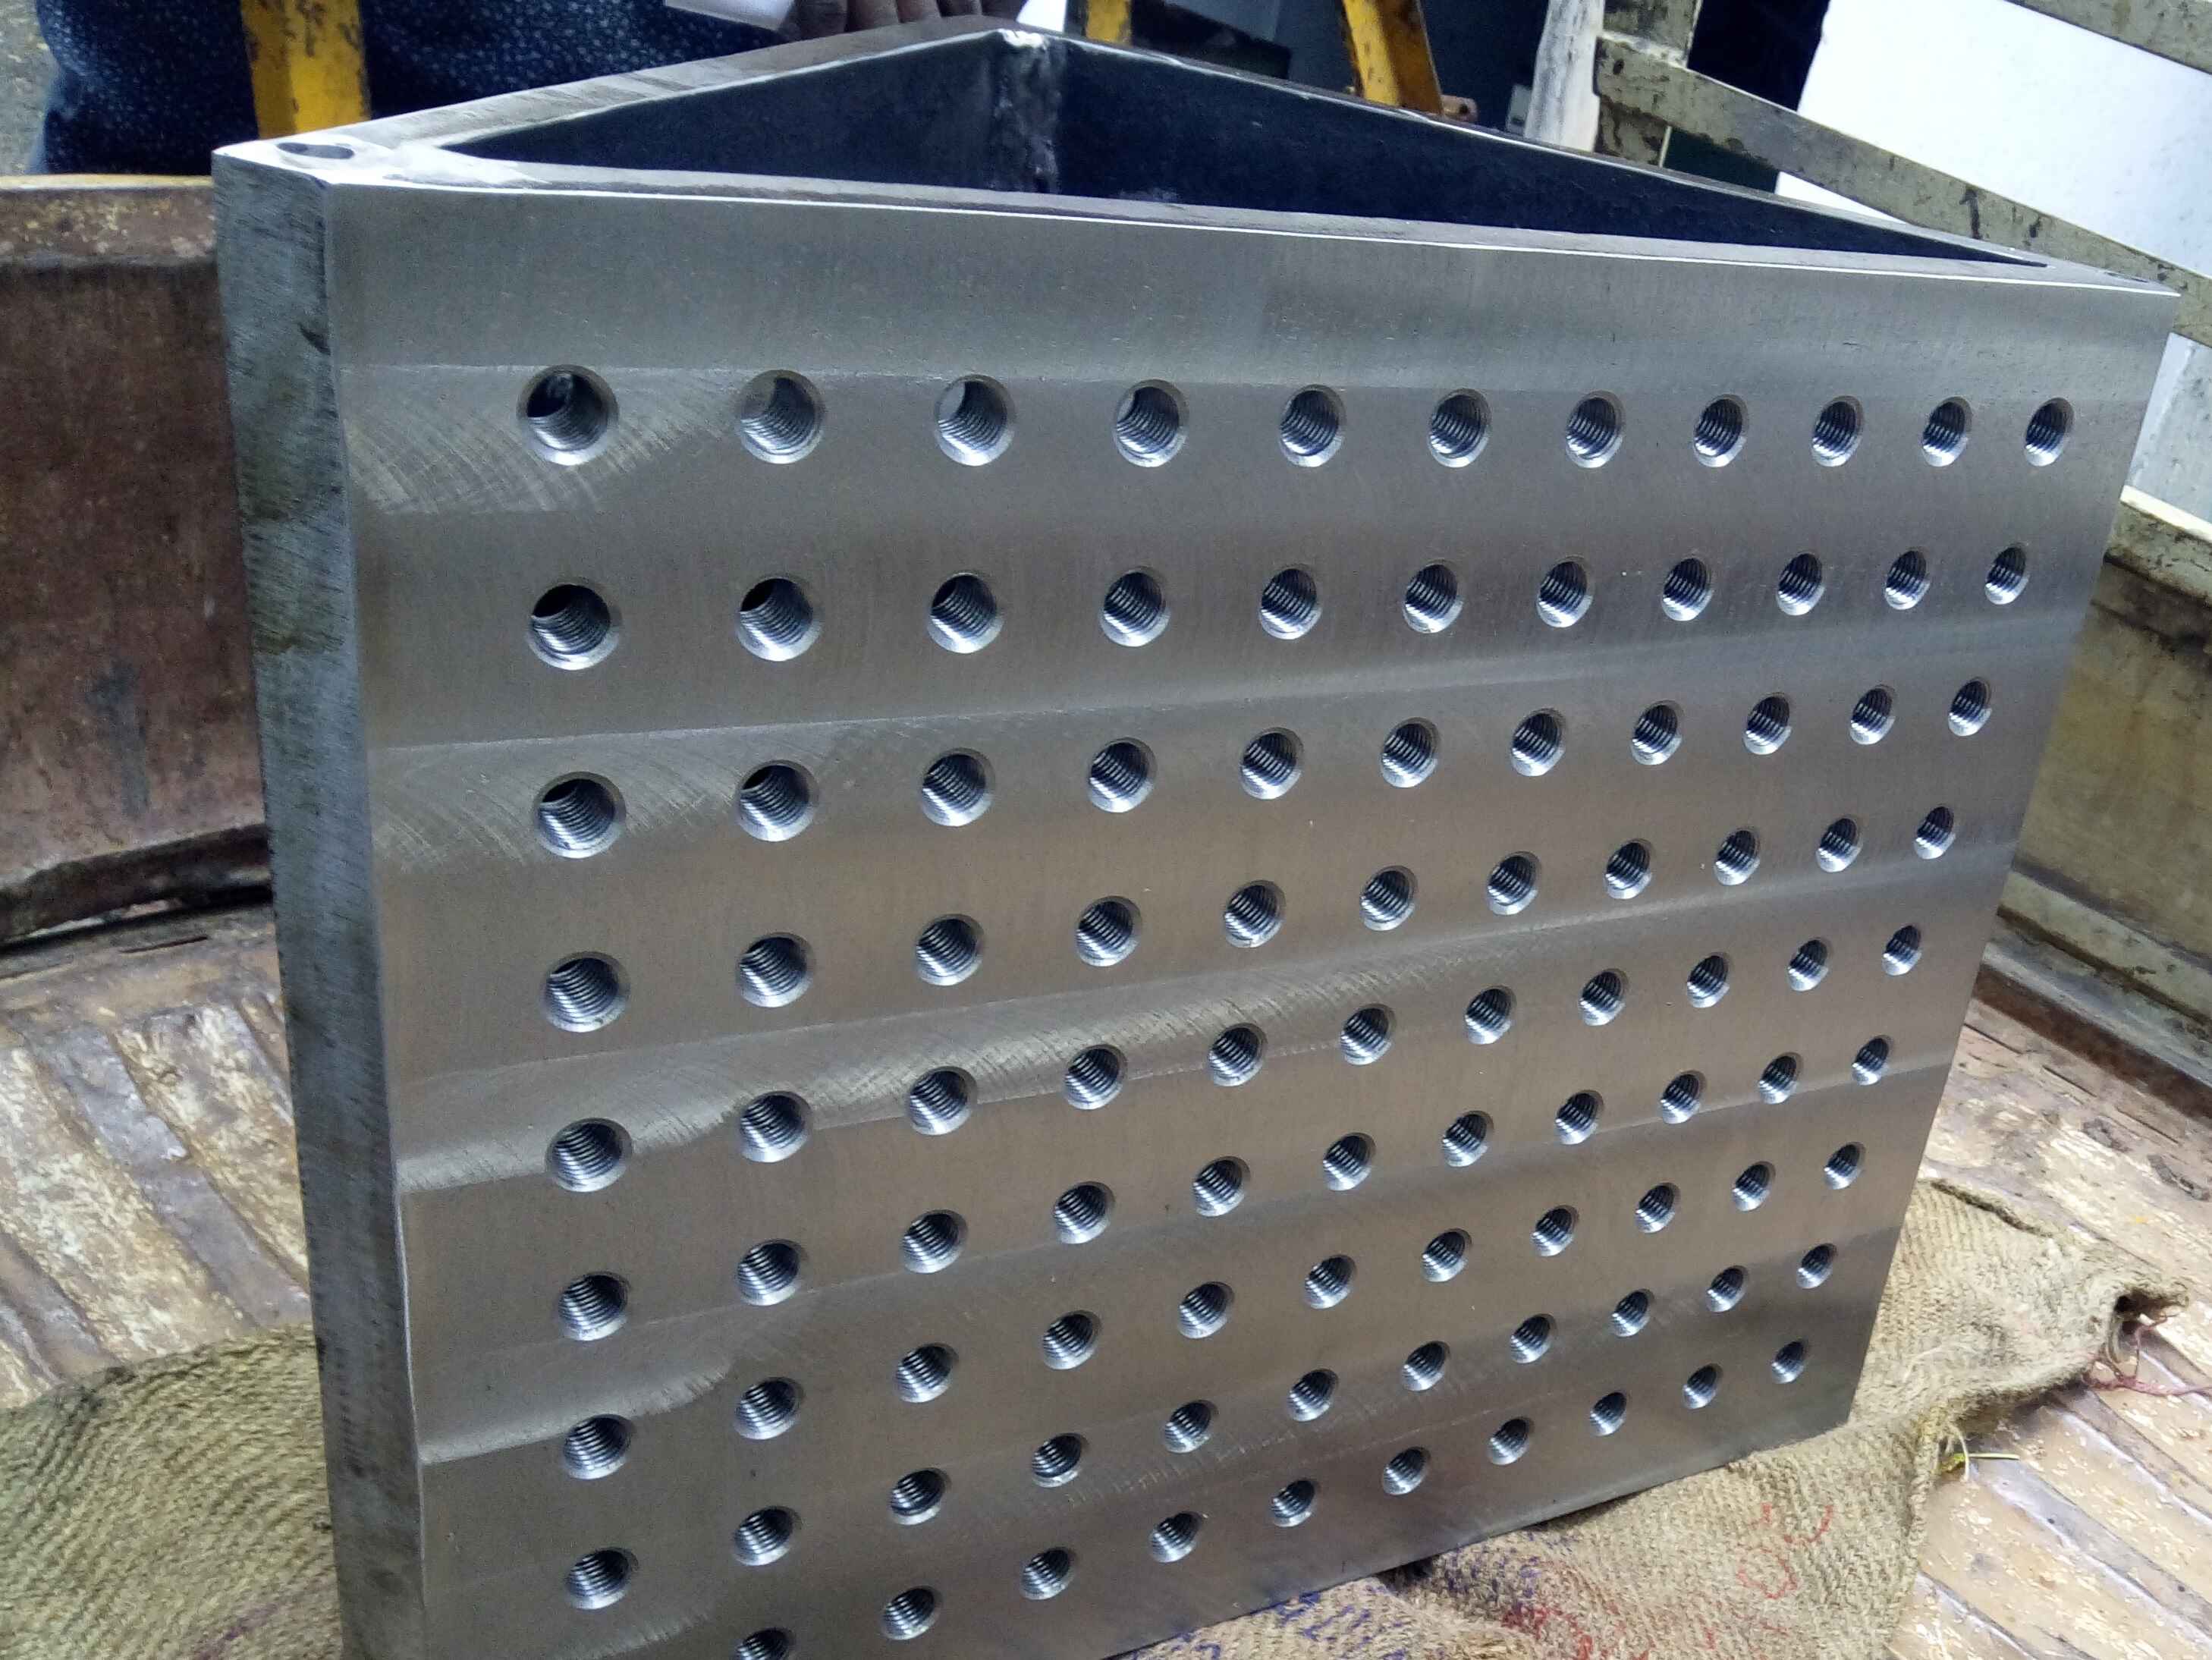 45 Degree Angle plate for Valve body Machining